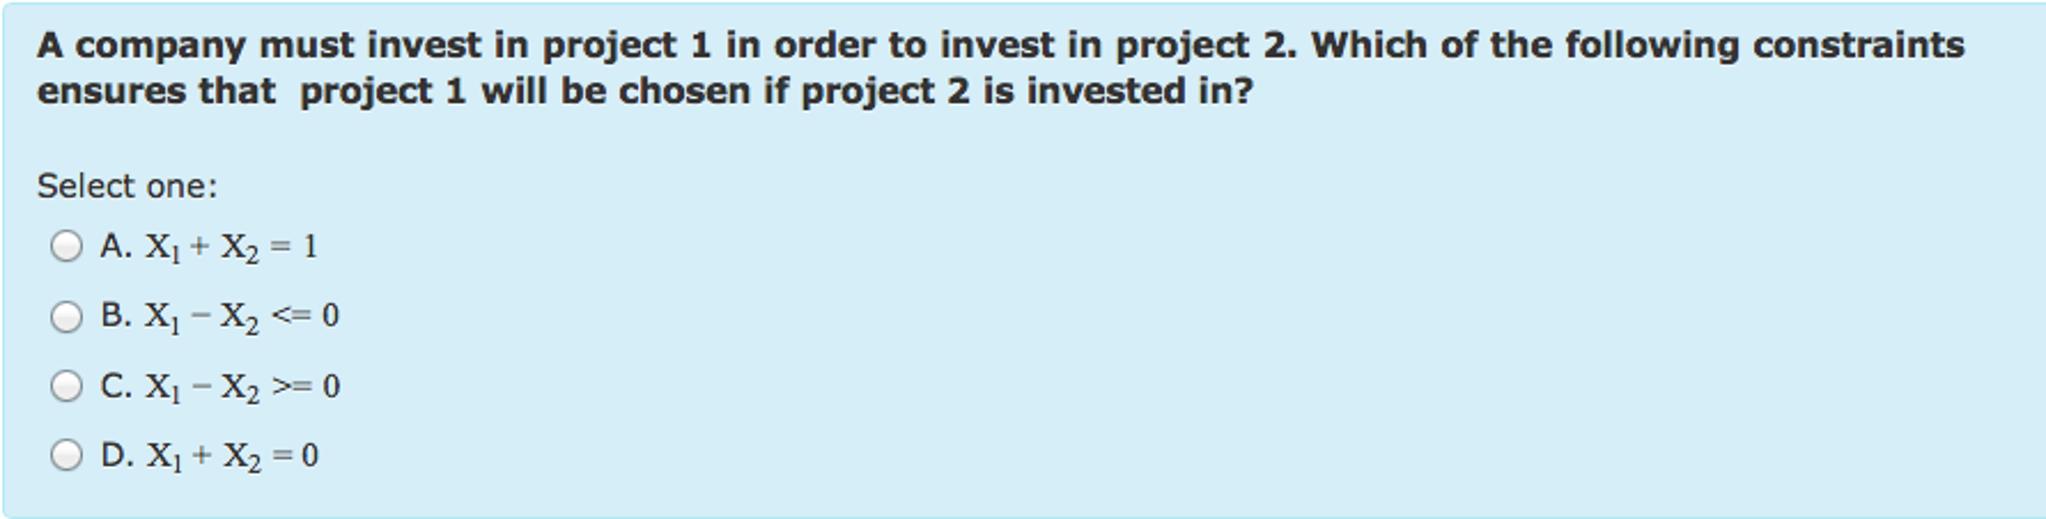 A company must invest in project 1 in order to inv